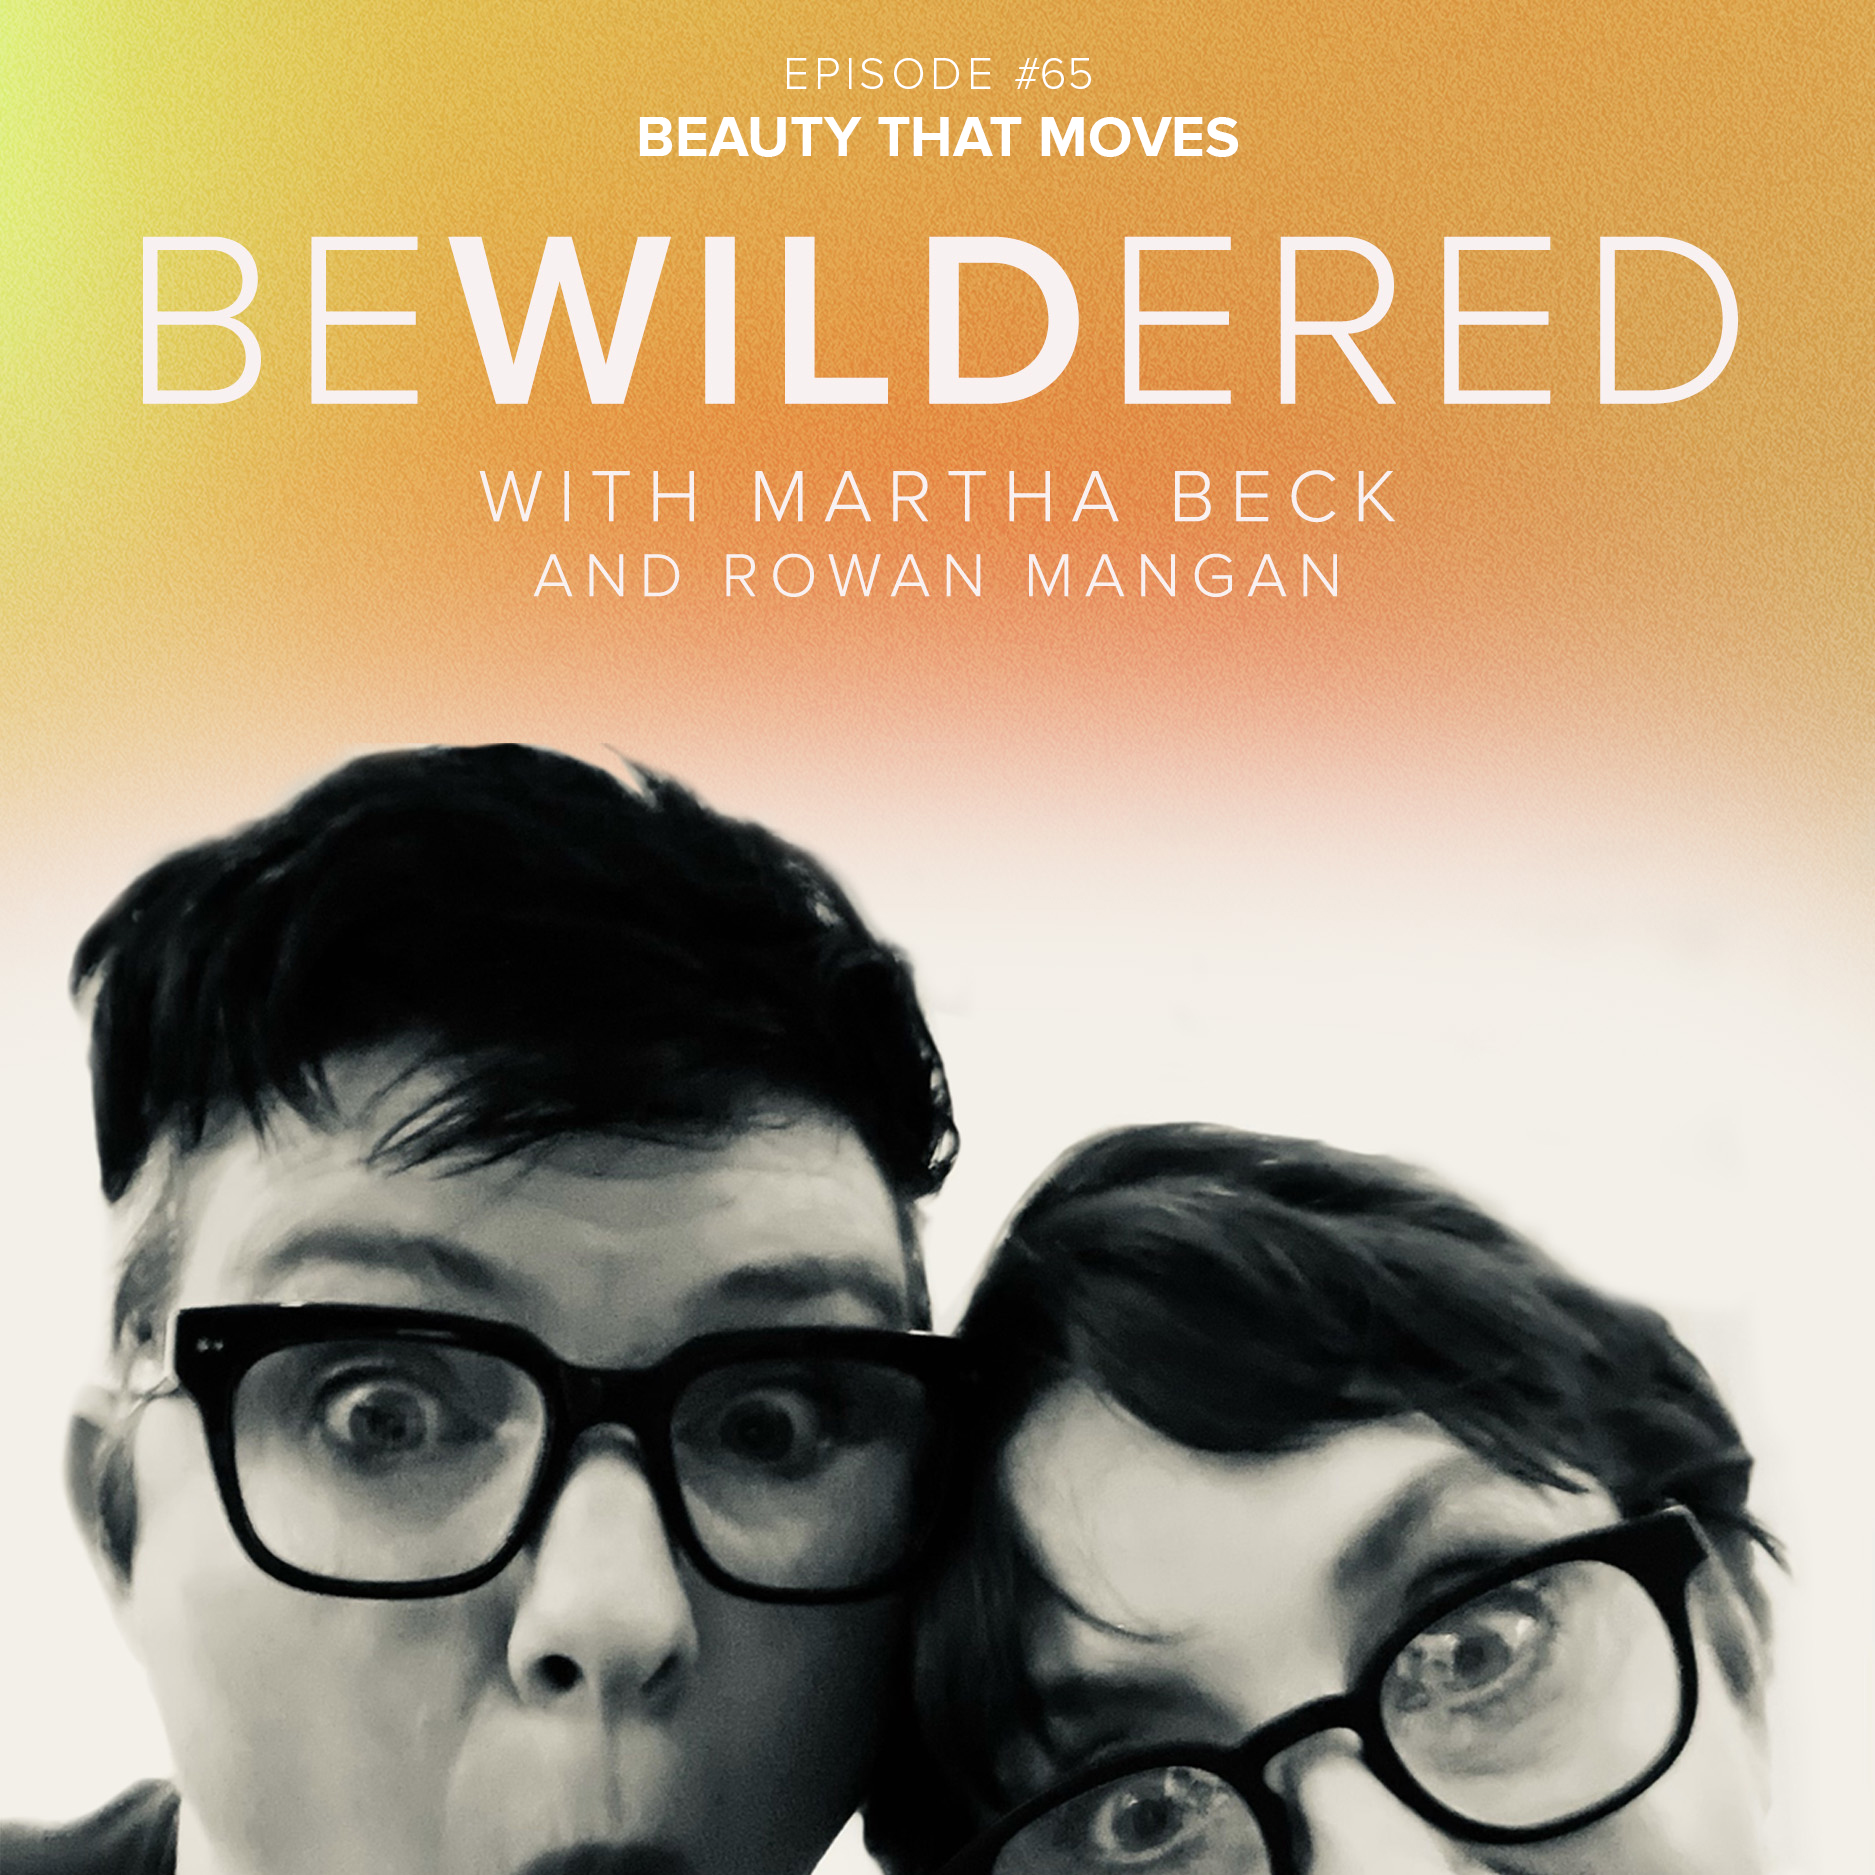 Image for Episode #65 Beauty That Moves for the Bewildered Podcast with Martha Beck and Rowan Mangan